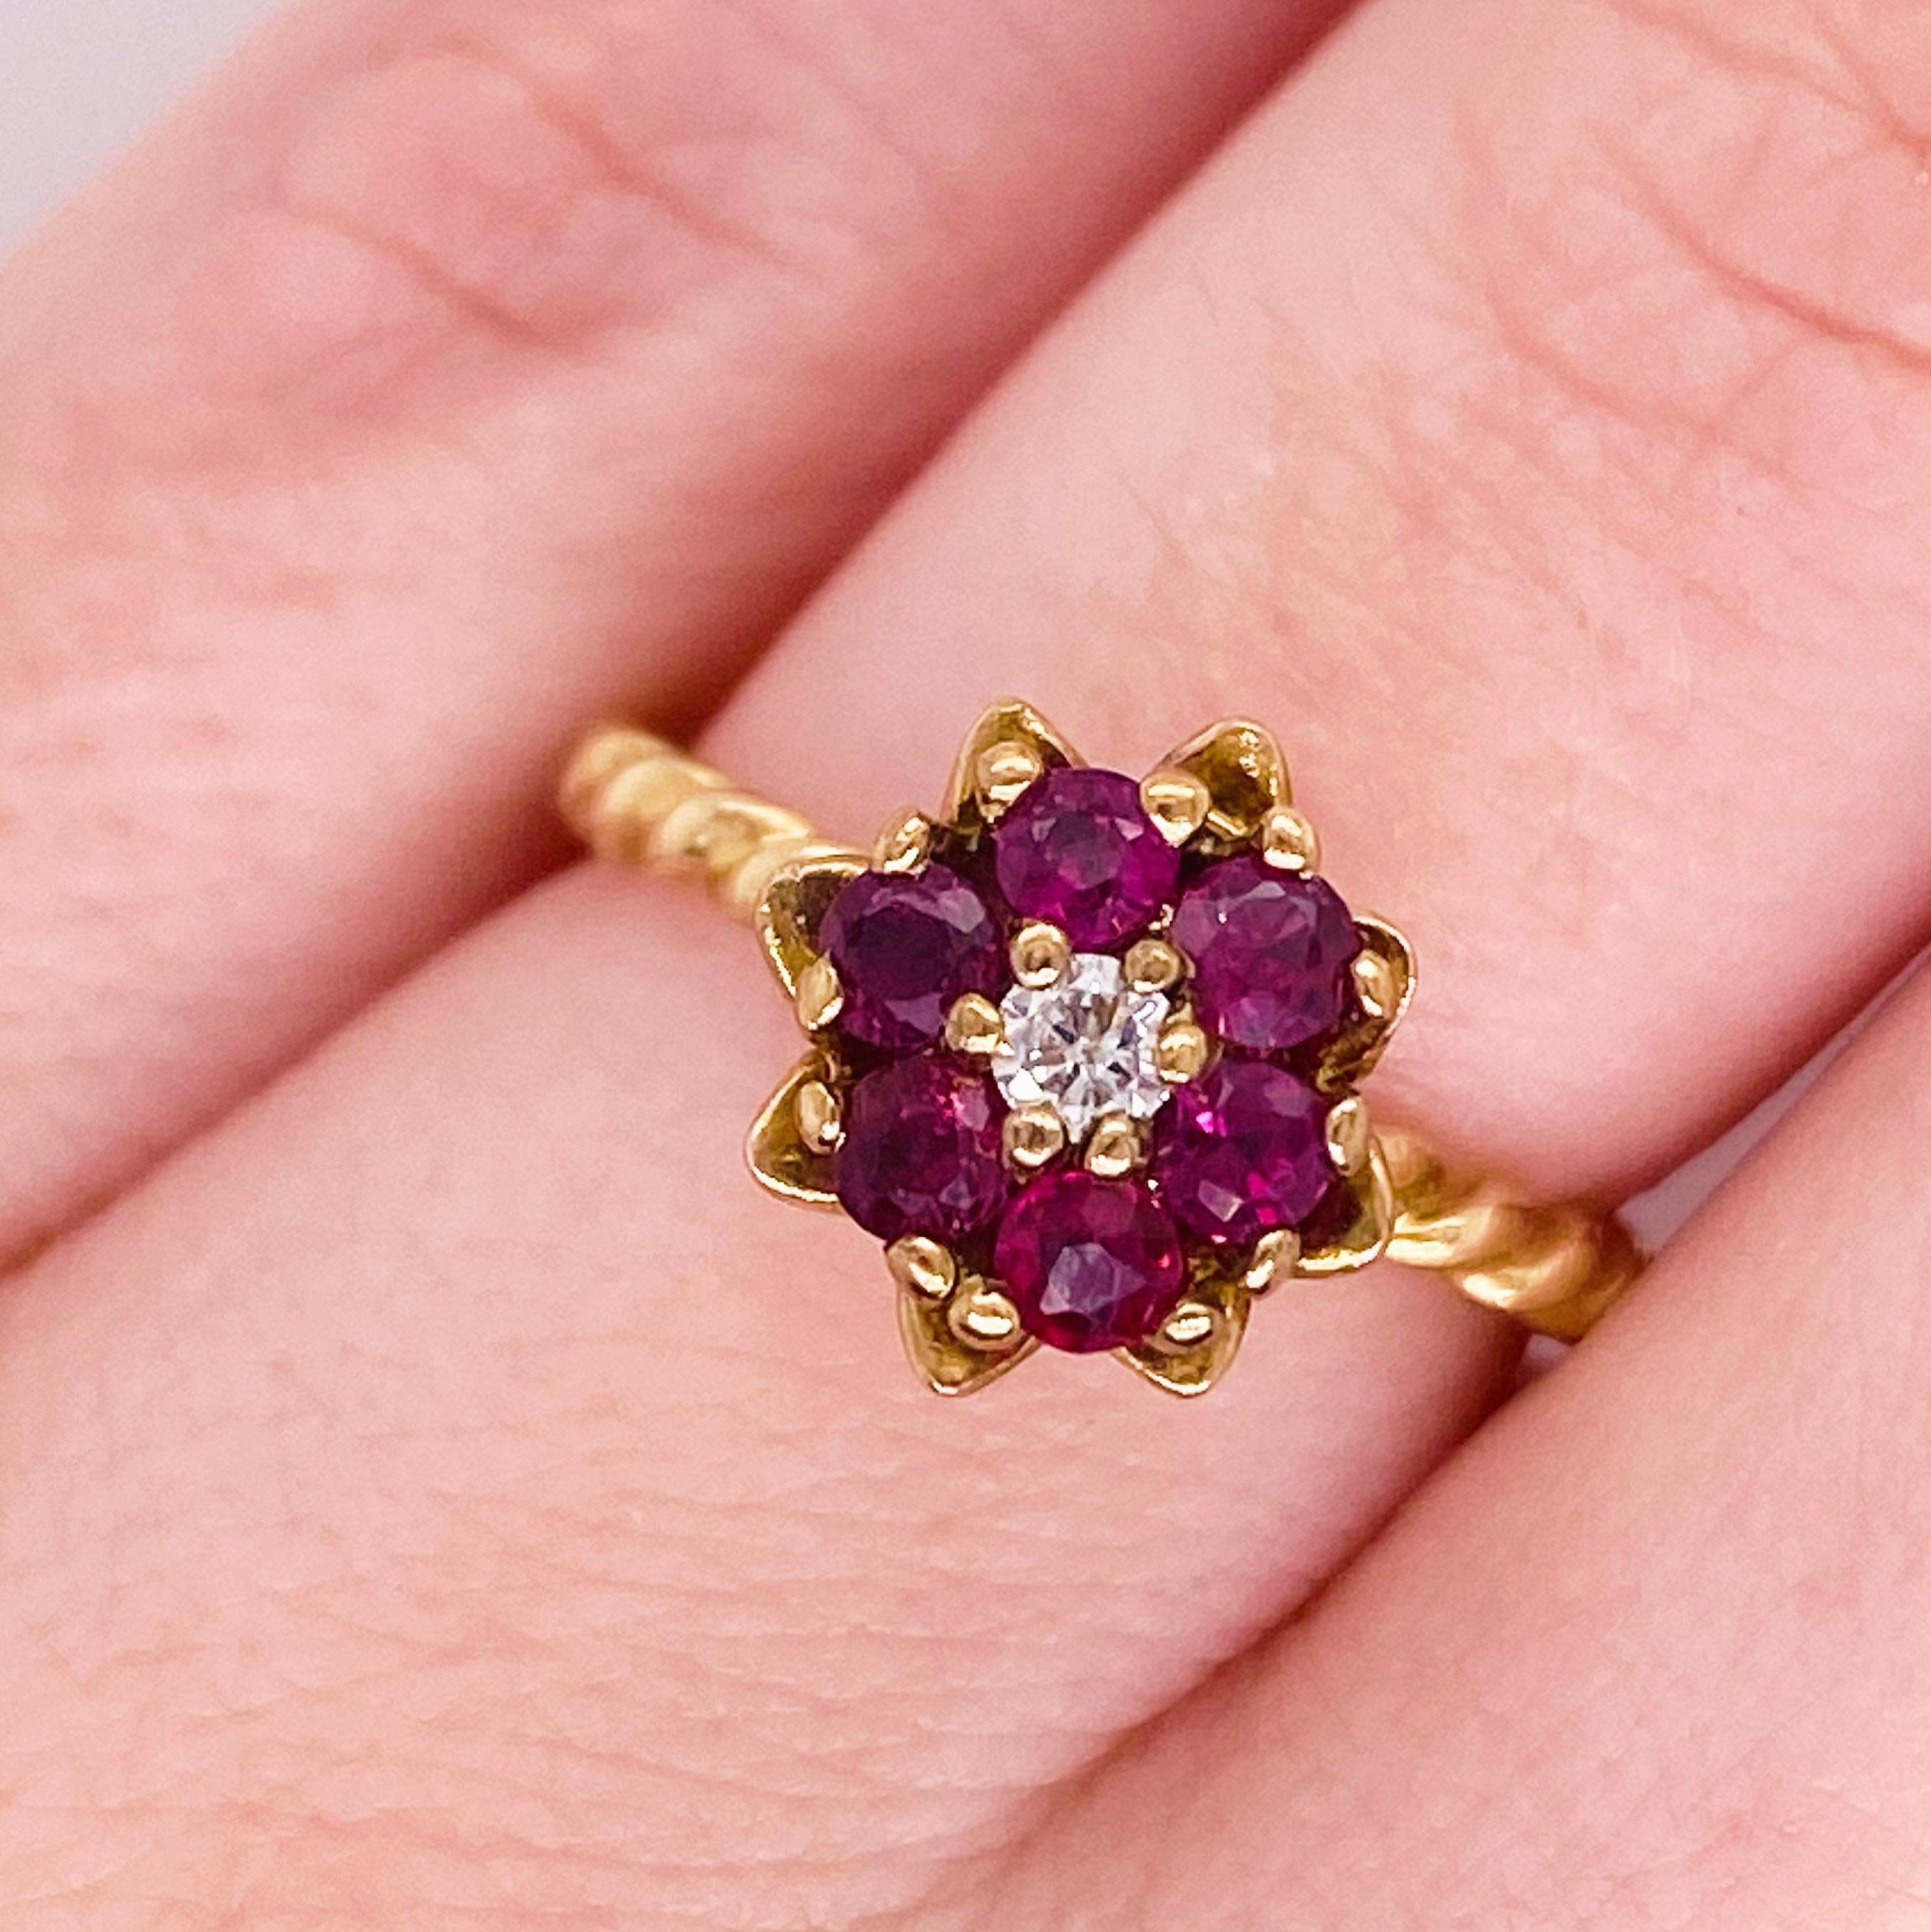 The adorable ruby and diamond tulip ring is a classic flower design that has been worn for generations. This dainty fine jewelry piece is made with genuine round ruby gemstones and a natural round brilliant diamond. The flower design has deep